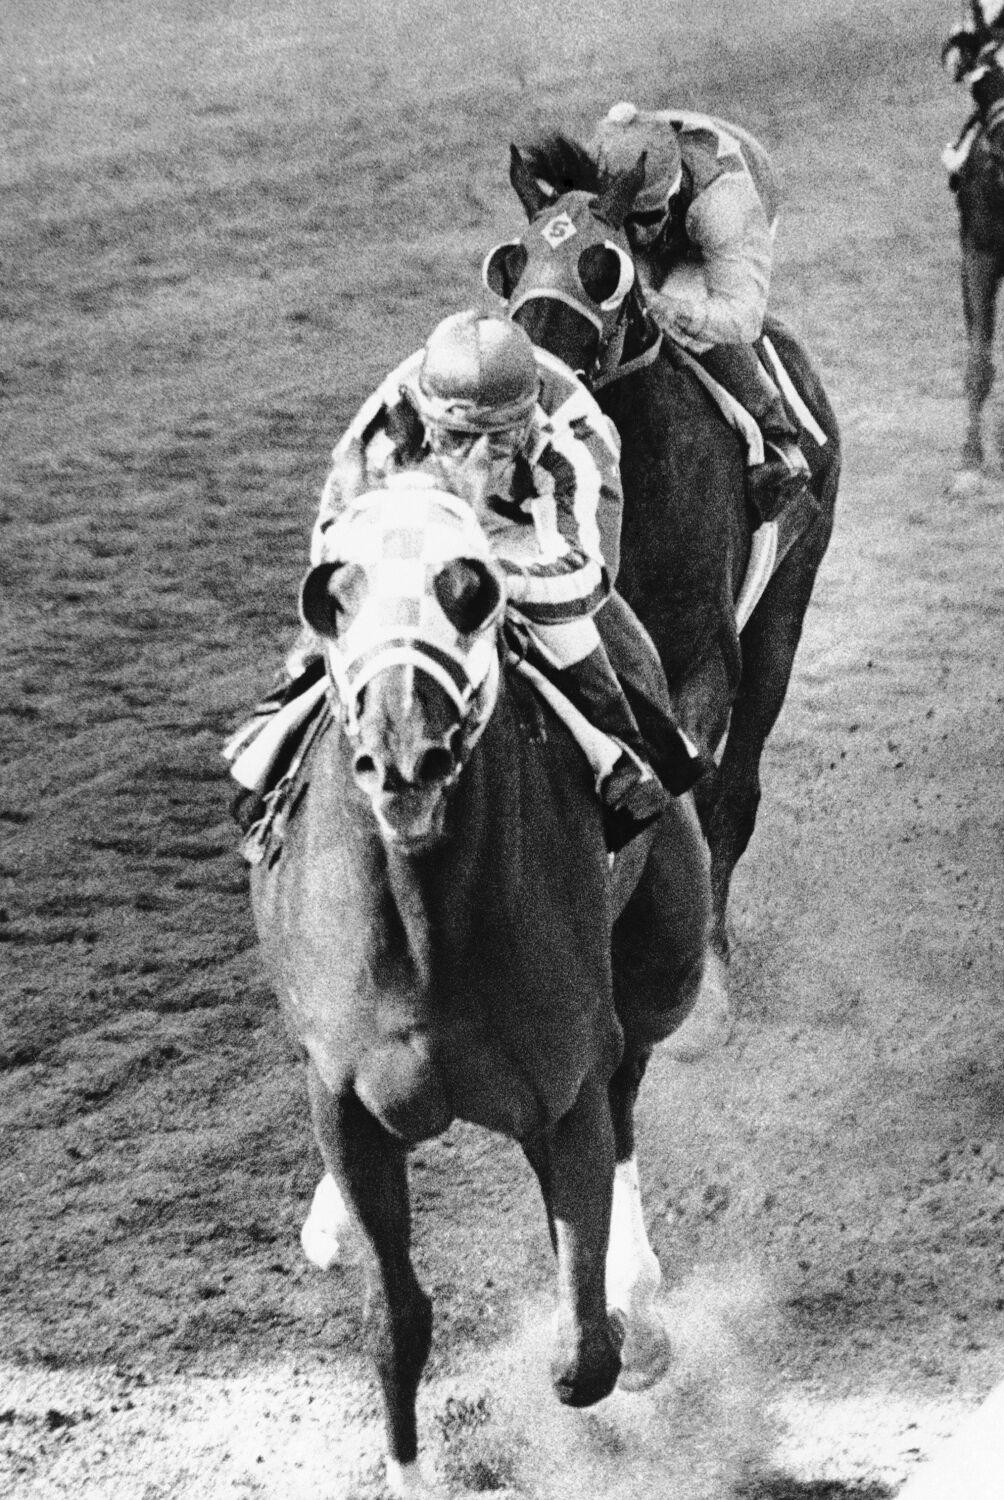 Secretariat, with Ron Turcotte up, has the lead over Sham, ridden by Laffit Pincay, as he wins the 98th Preakness Stakes